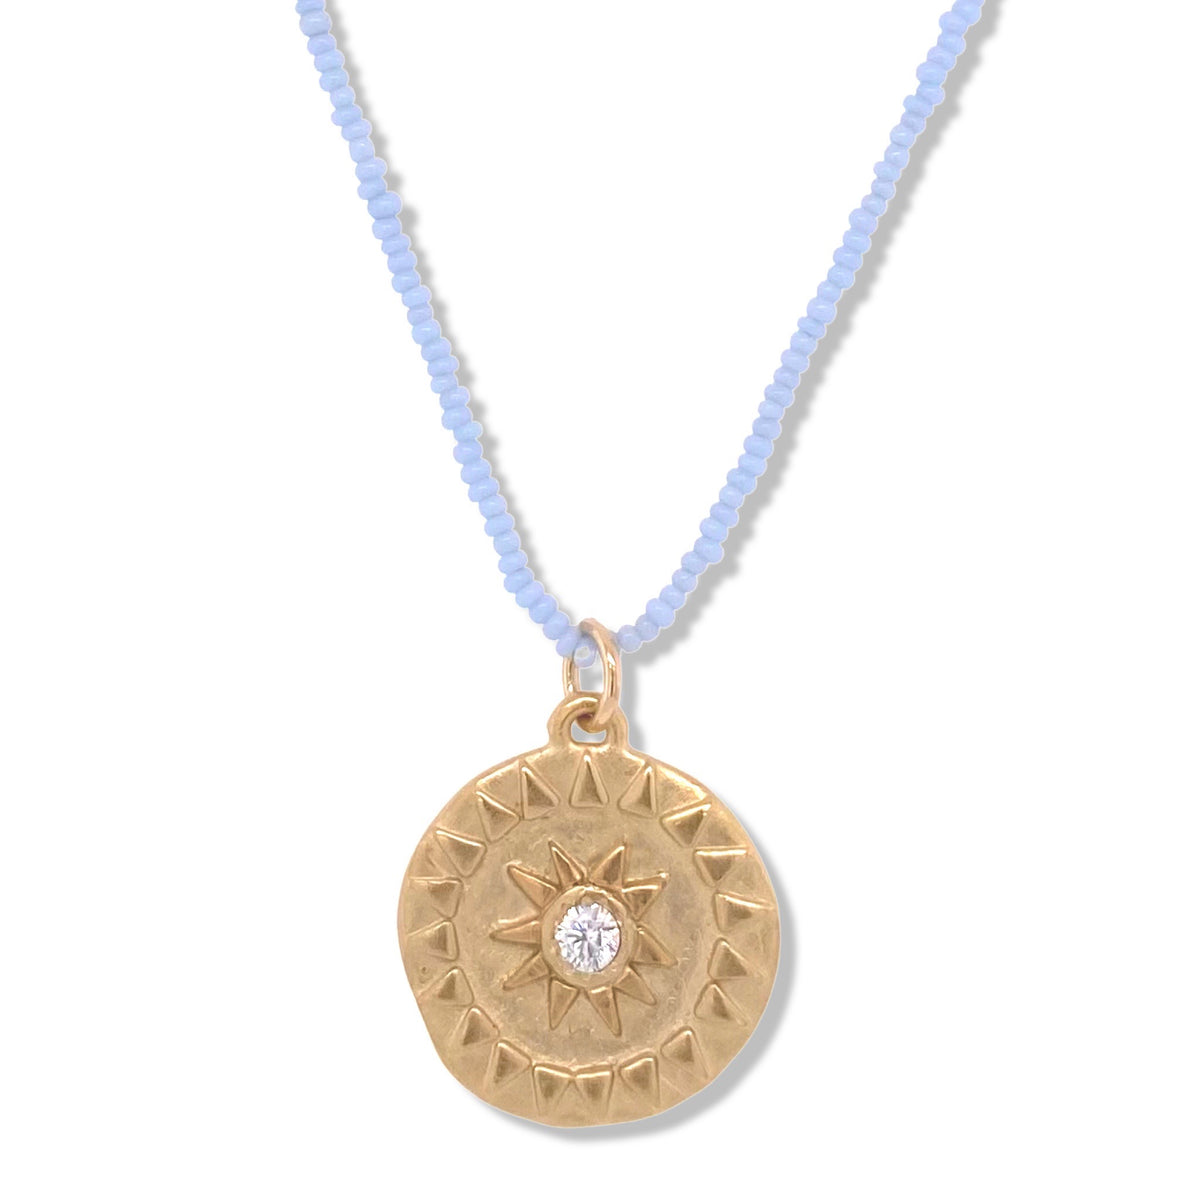 SOL NECKLACE IN GOLD ON BABY BLUE BEADS